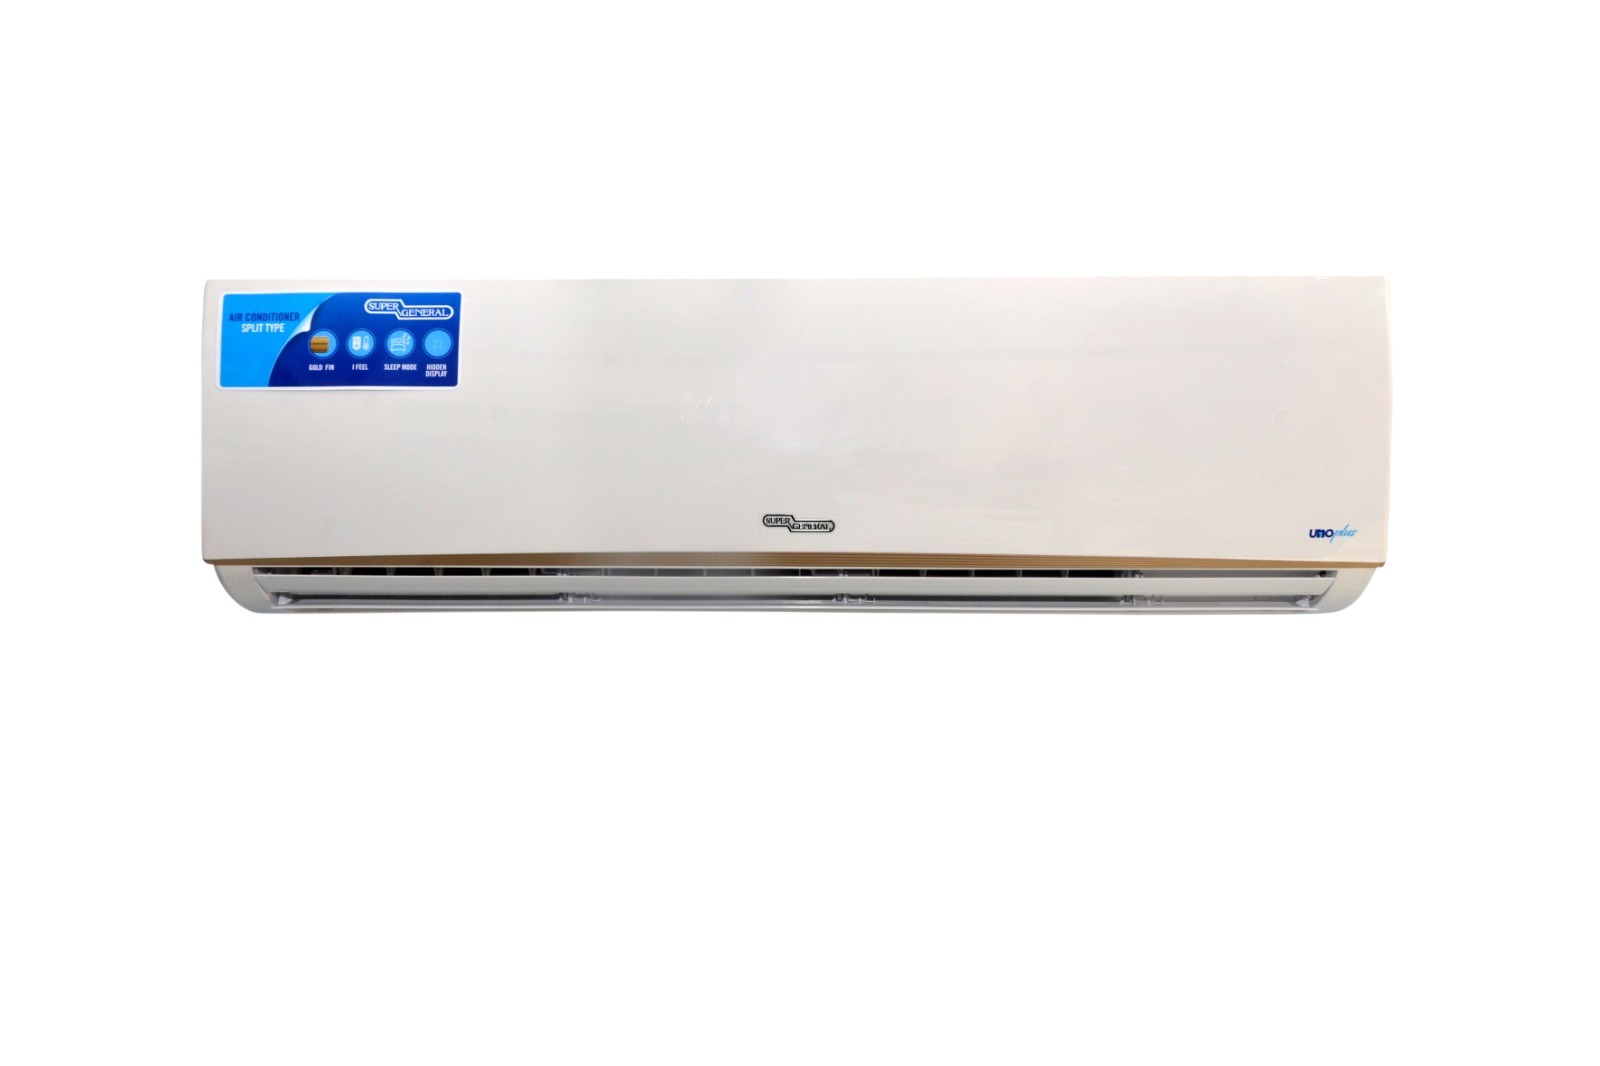 SUPER GENERAL Split Air Conditioner, 18000 BTU Hot and Cold, UNO, Golden Feathers, Copper Condenser, Turbo System - KSGS183GER